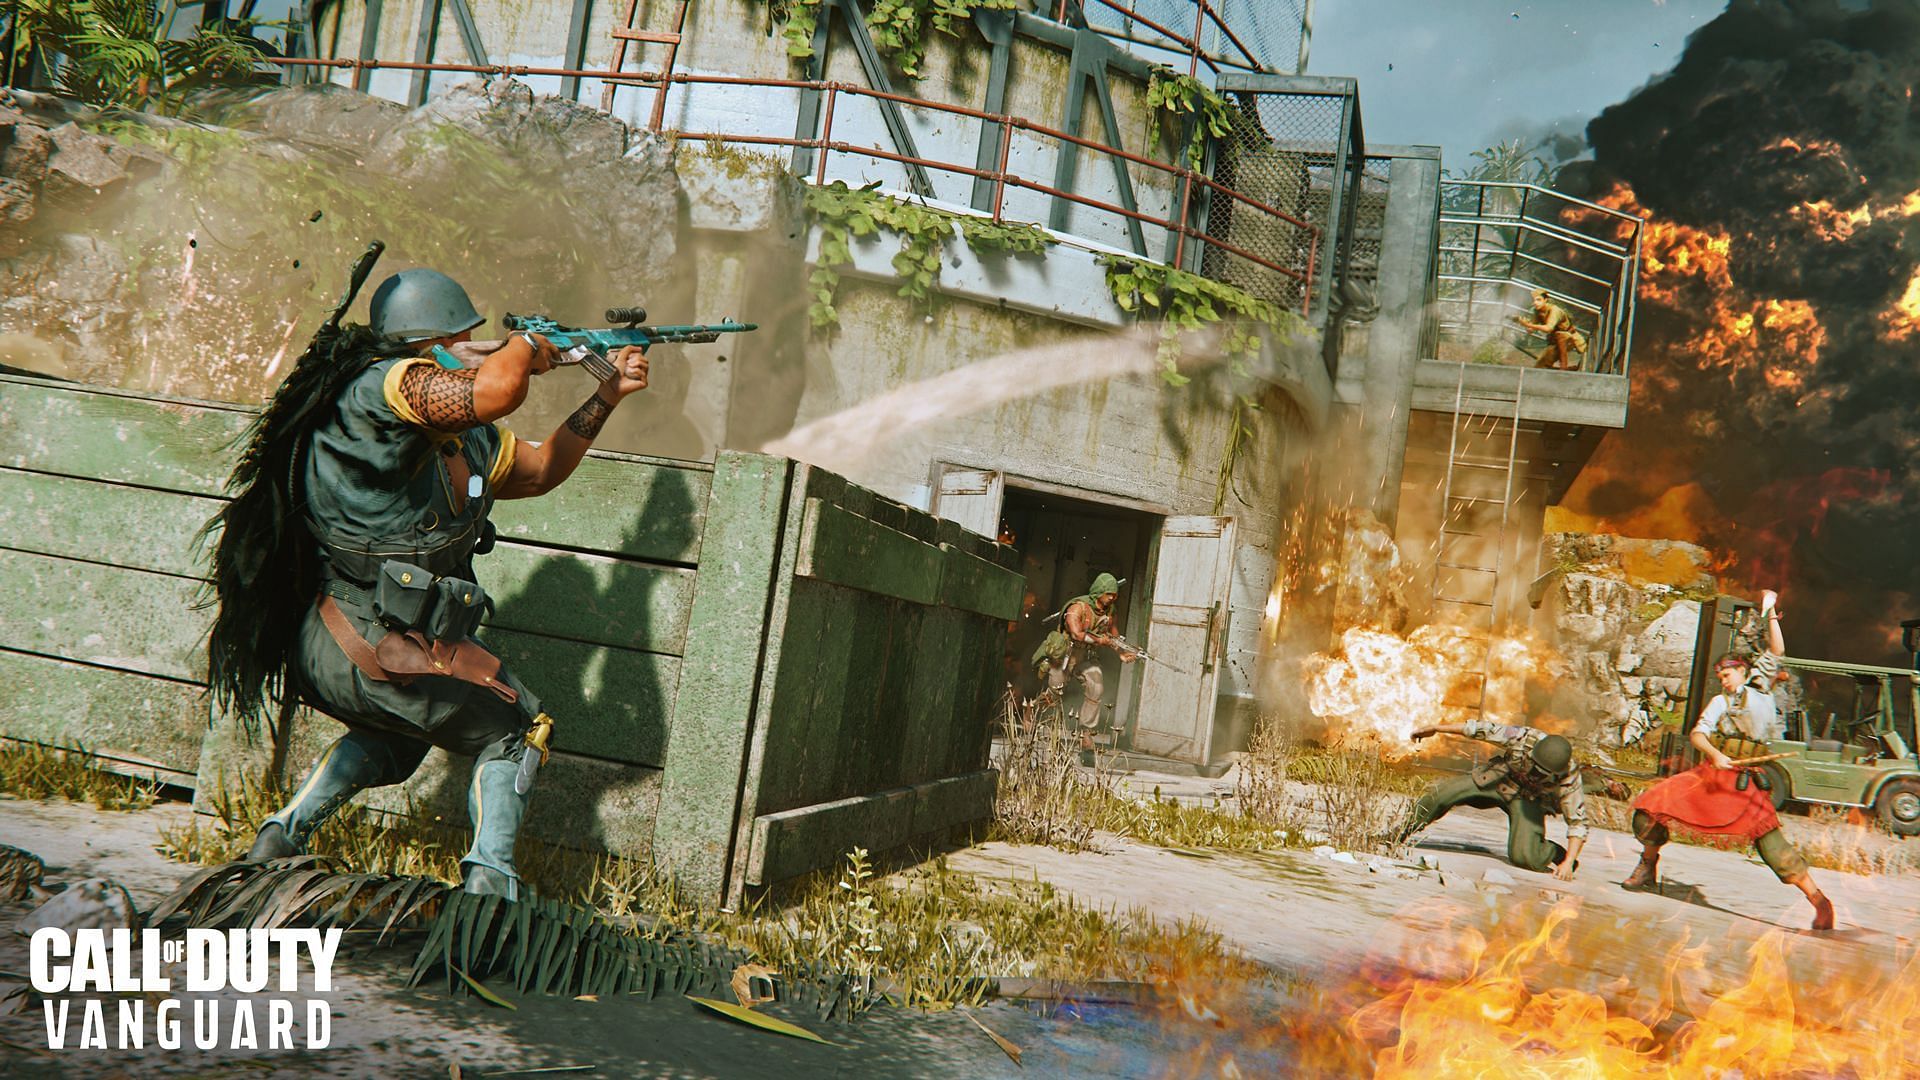 Call of Duty: Vanguard may soon get the Gun Game mode (Image via Activision)